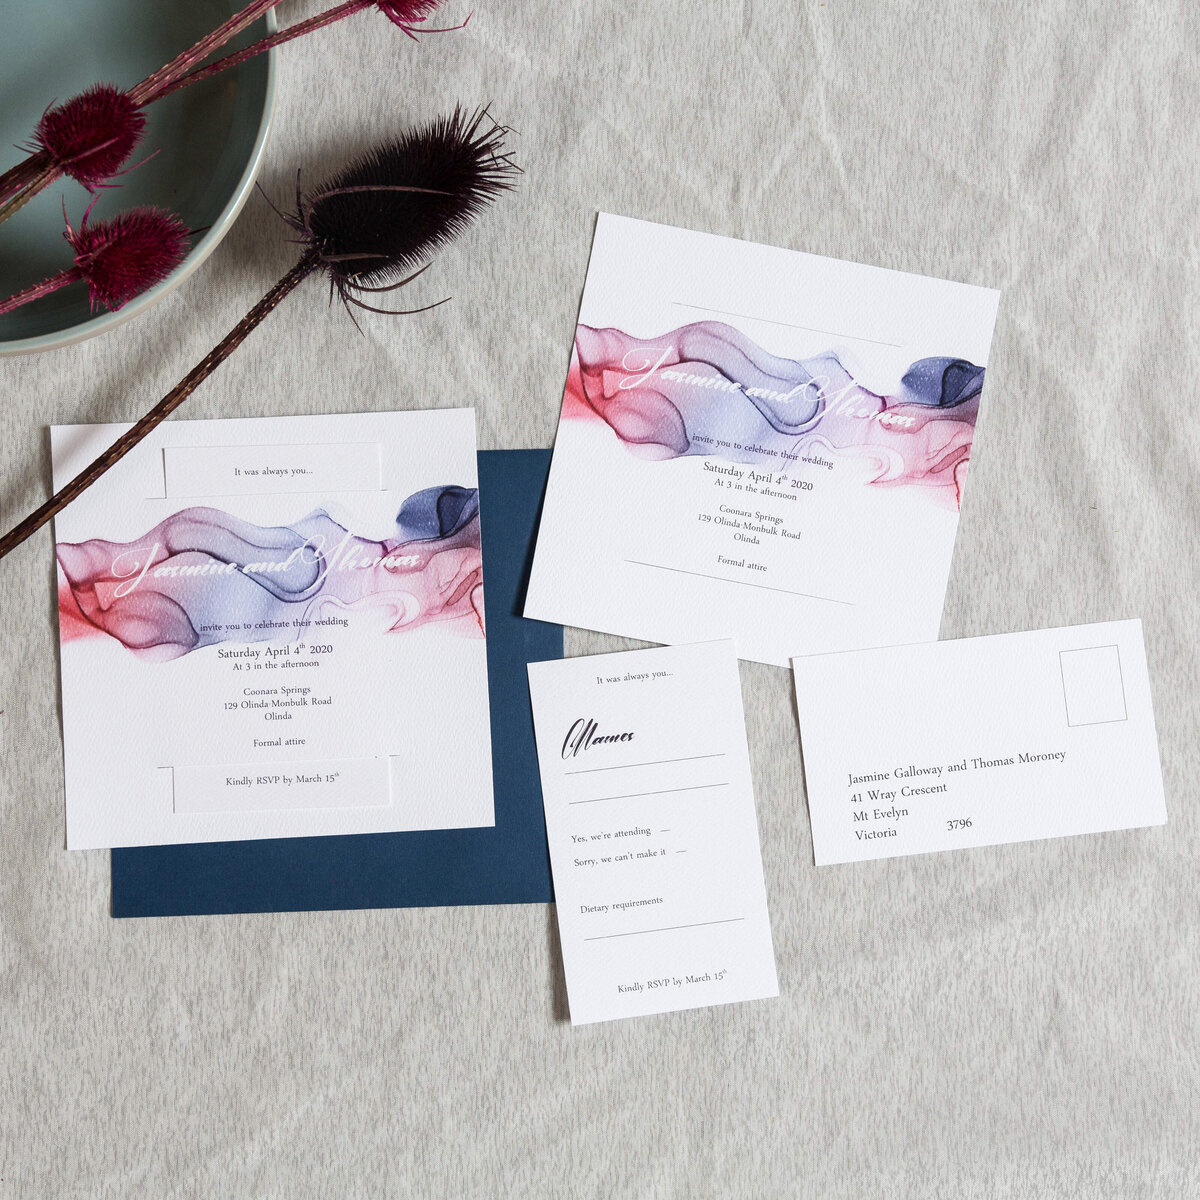 Blue wedding invitation with an ink design and an RSVP card that sits within the invitation